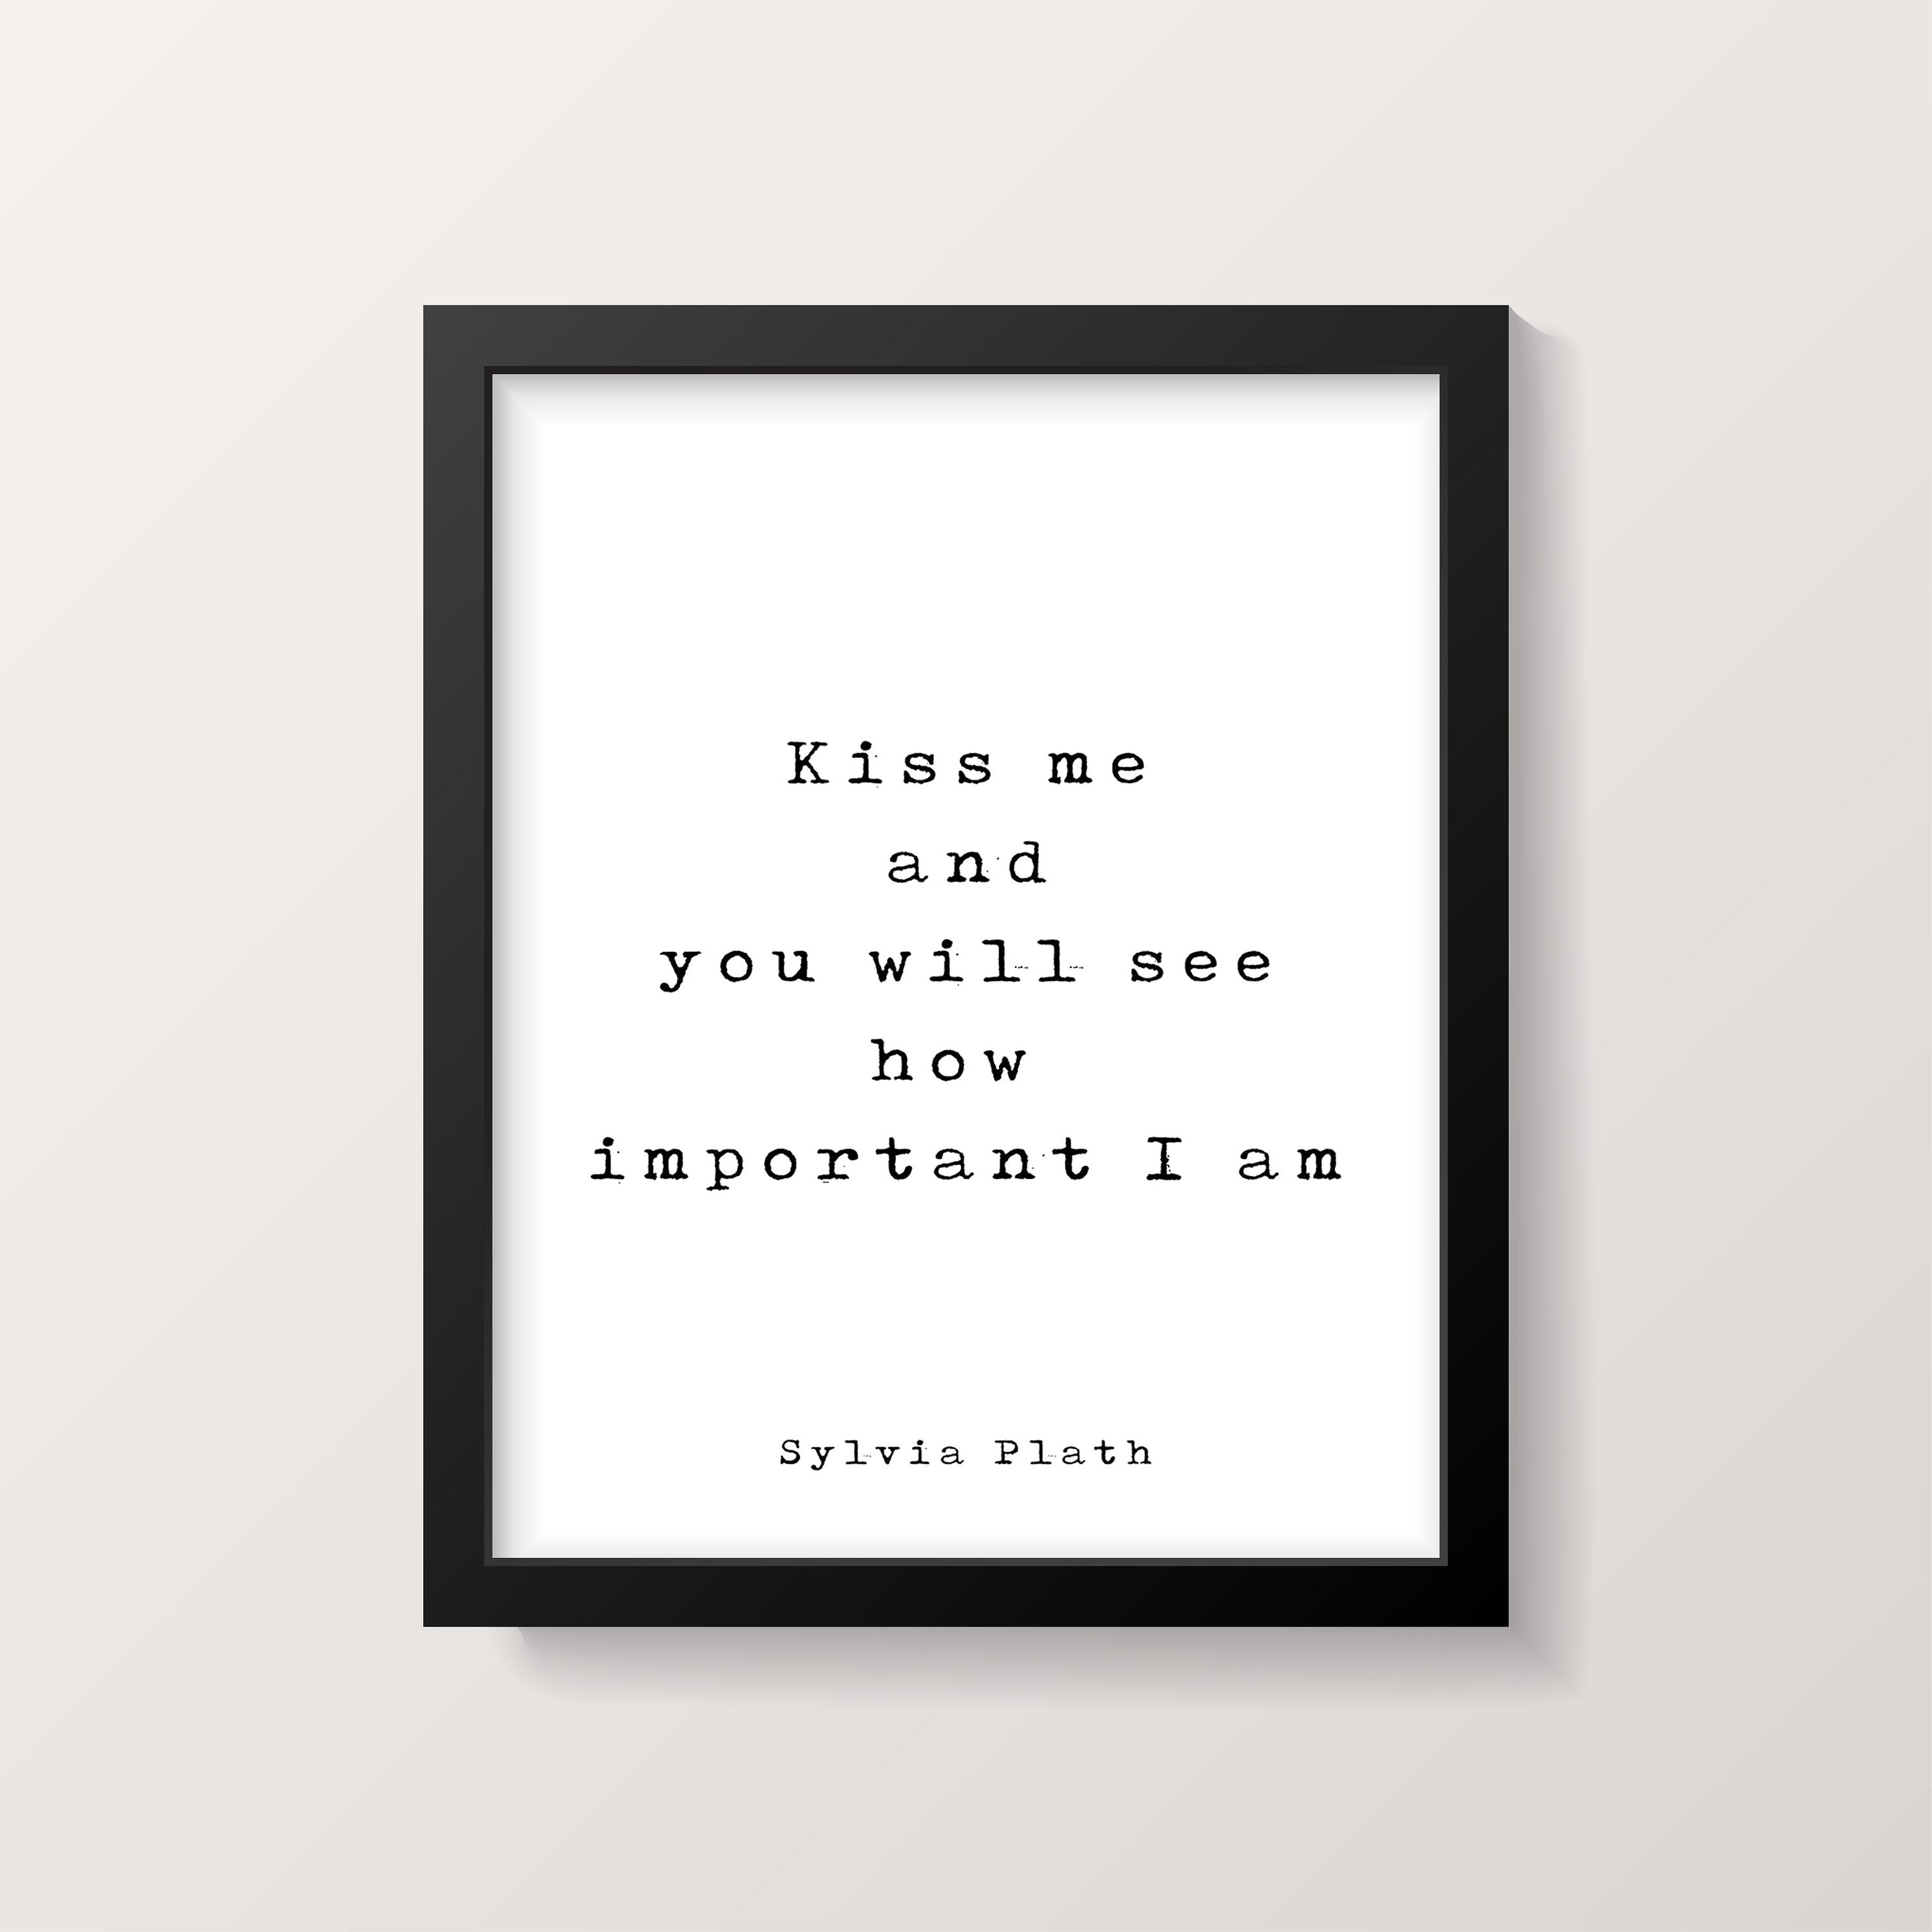 Sylvia Plath Love Quote, Kiss Me And You Will See How Important I Am